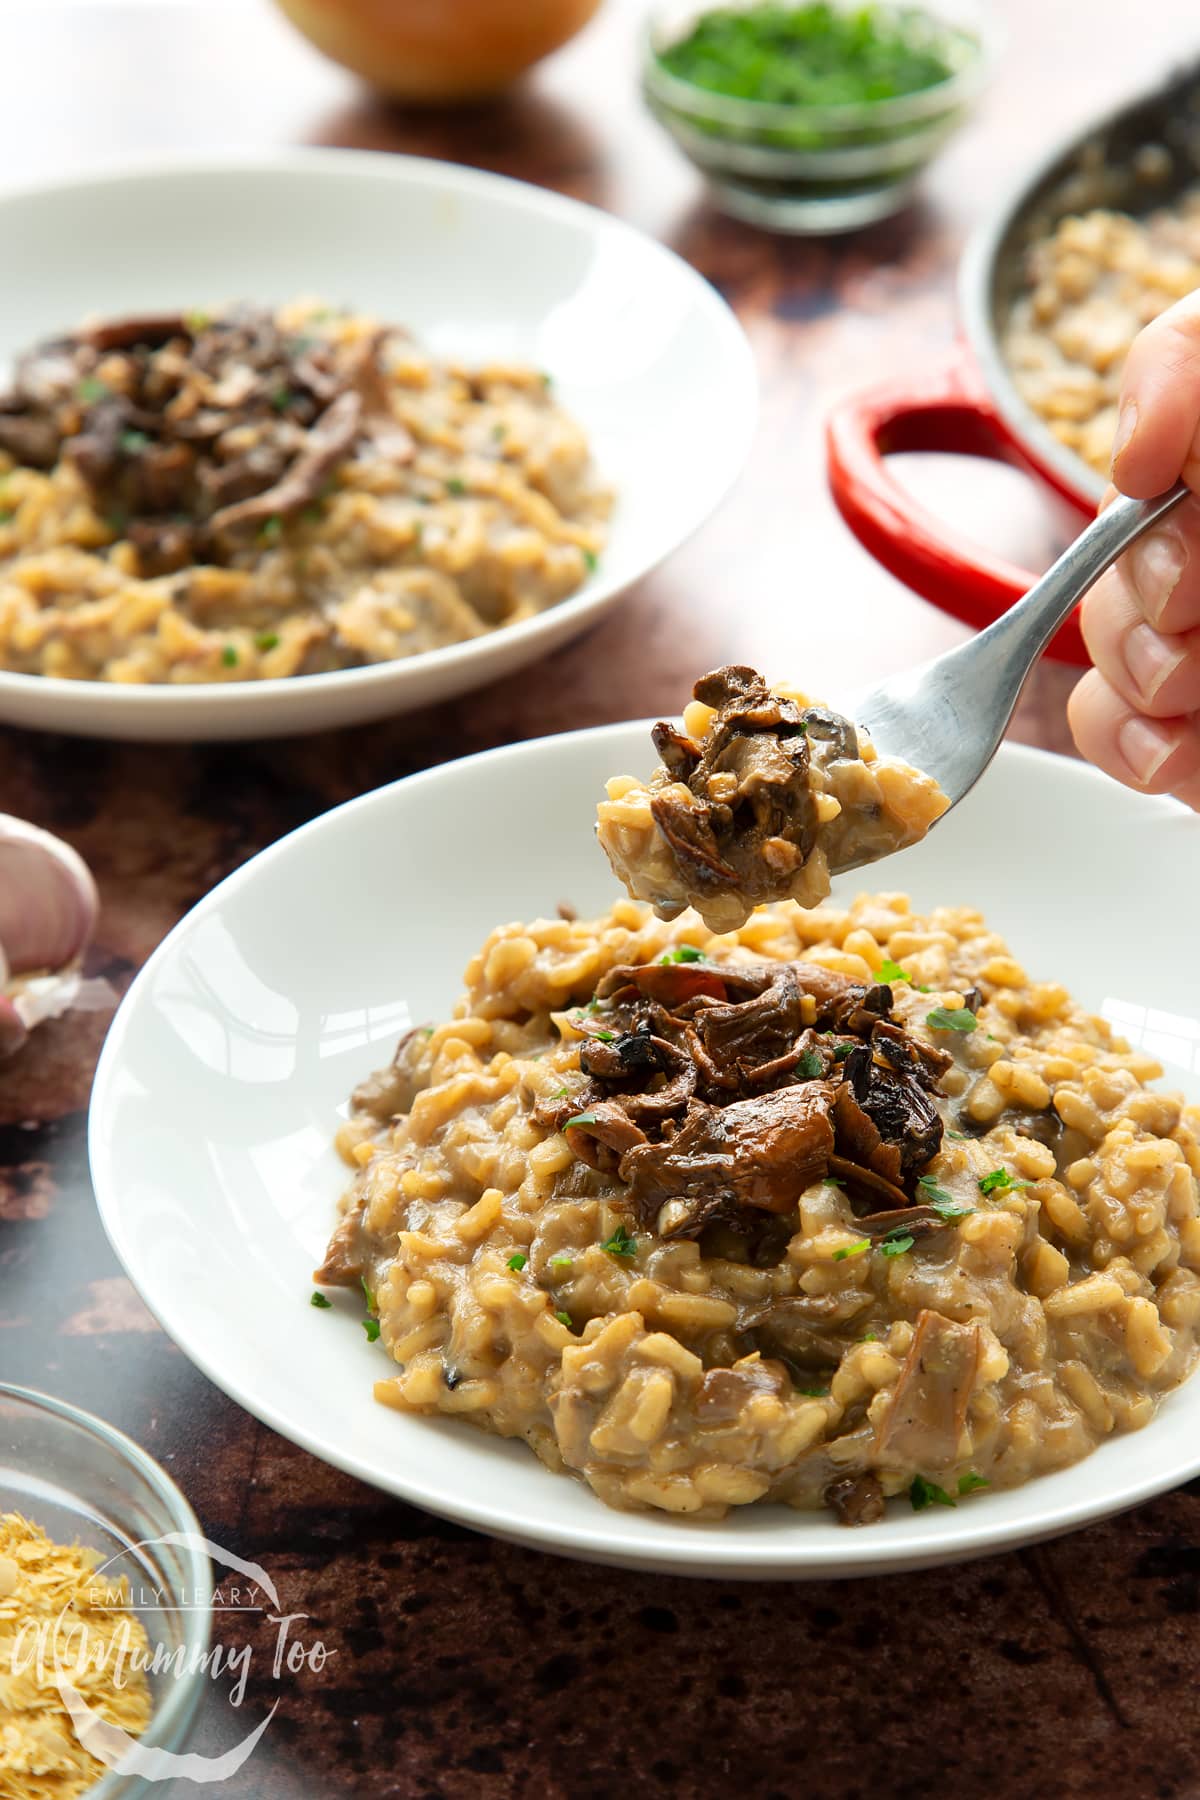 Vegan mushroom risotto in two shallow white bowls. A fork takes from of the risotto from the bowl in the foreground.